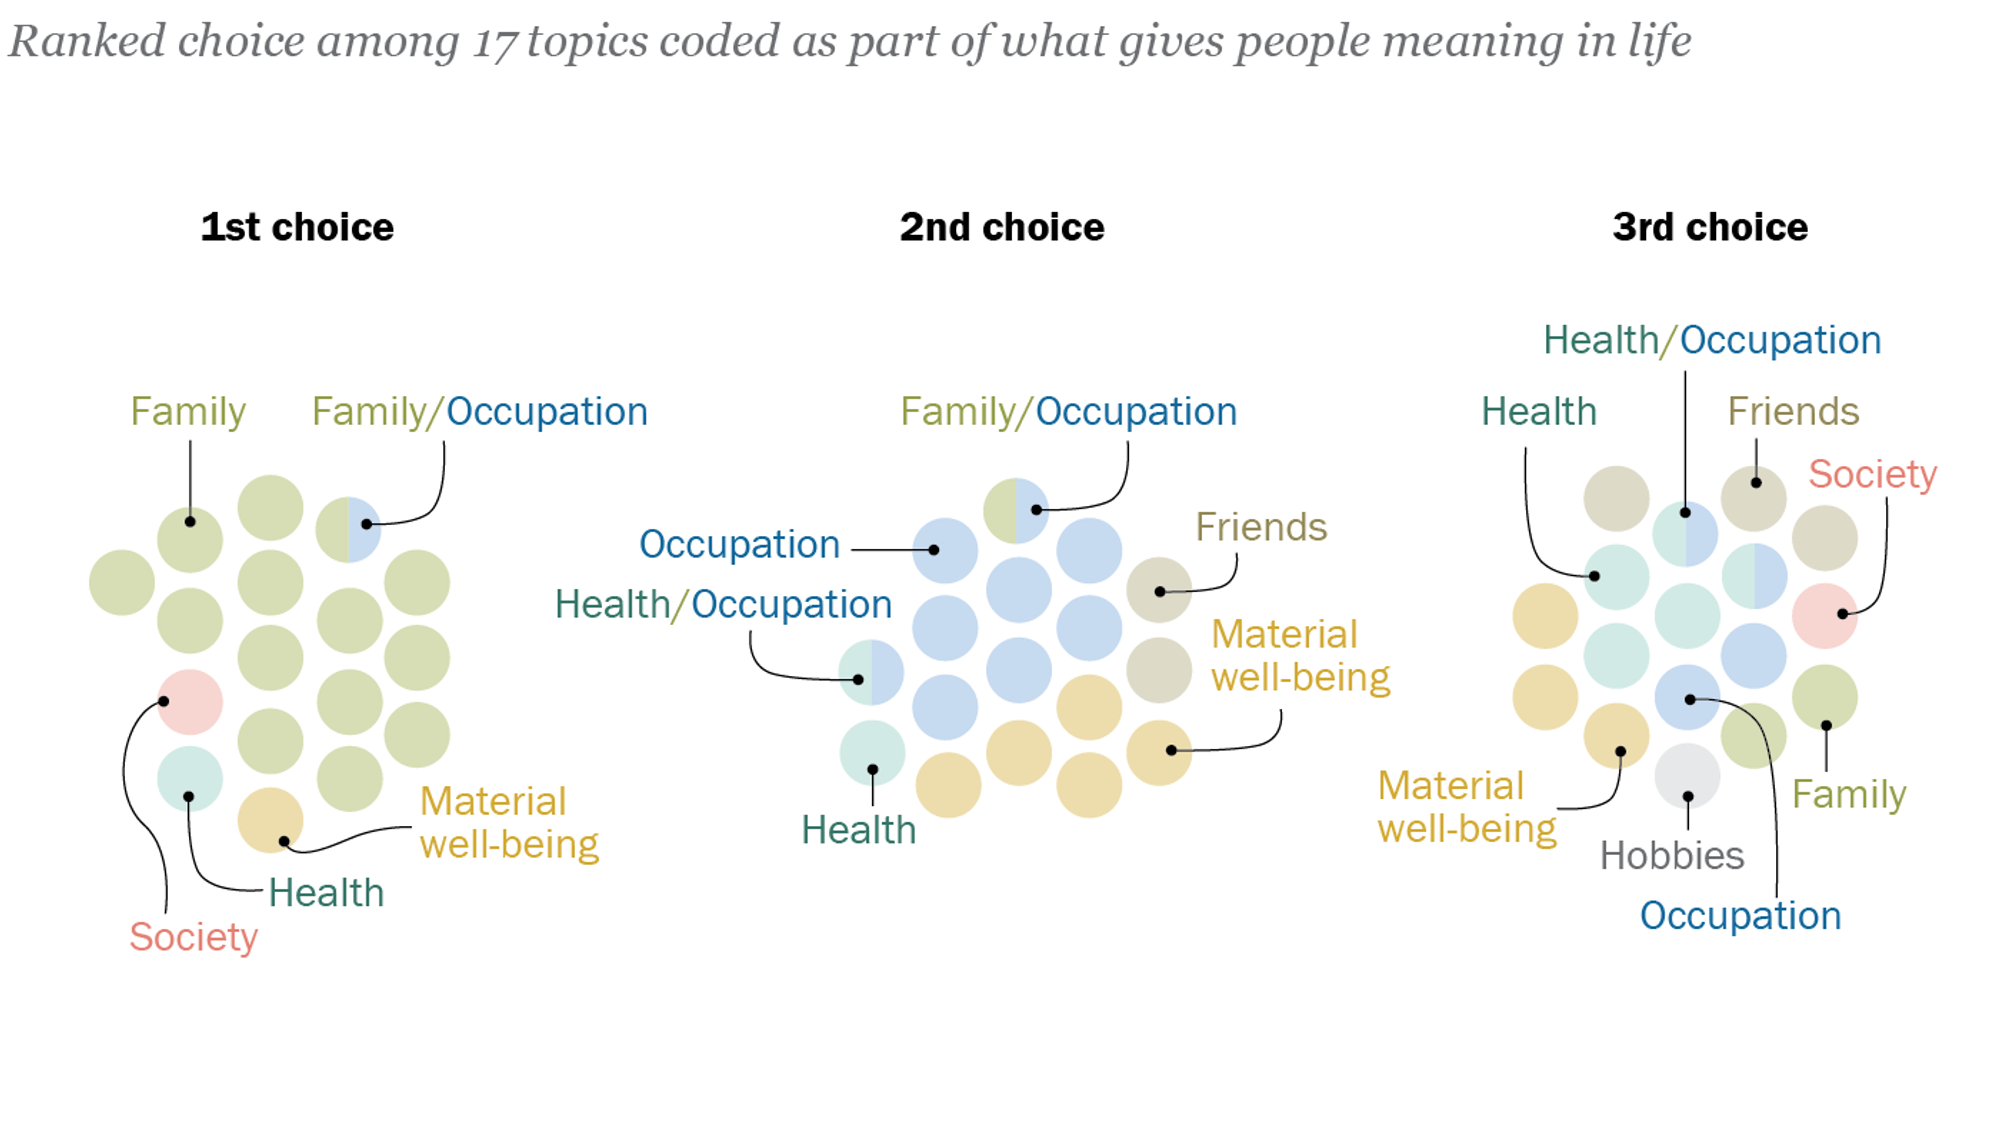 What Makes Life Meaningful? Views From 17 Advanced Economies